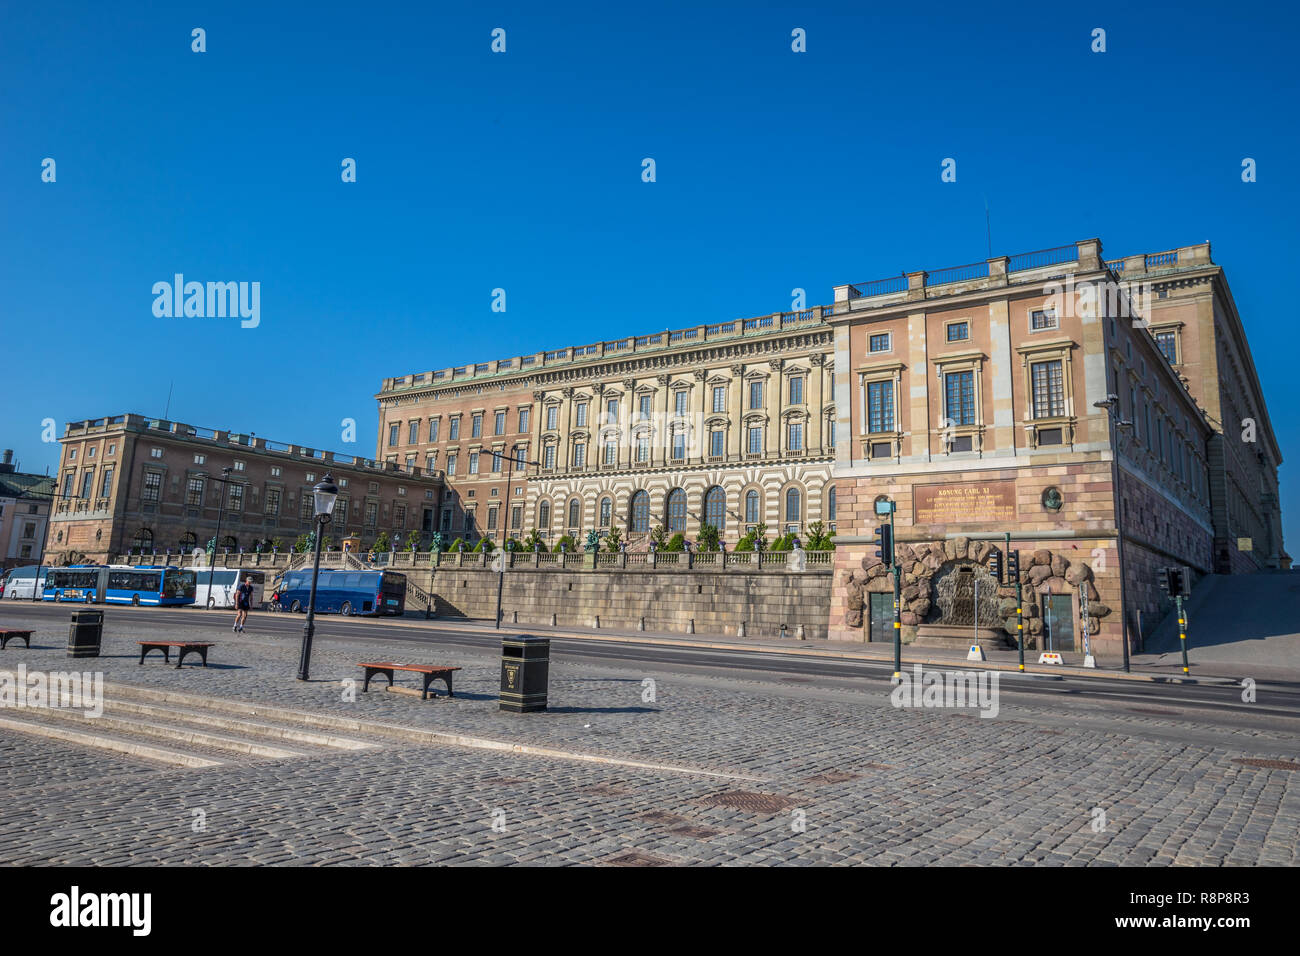 The Royal Palace of Stockholm Sweden Stock Photo